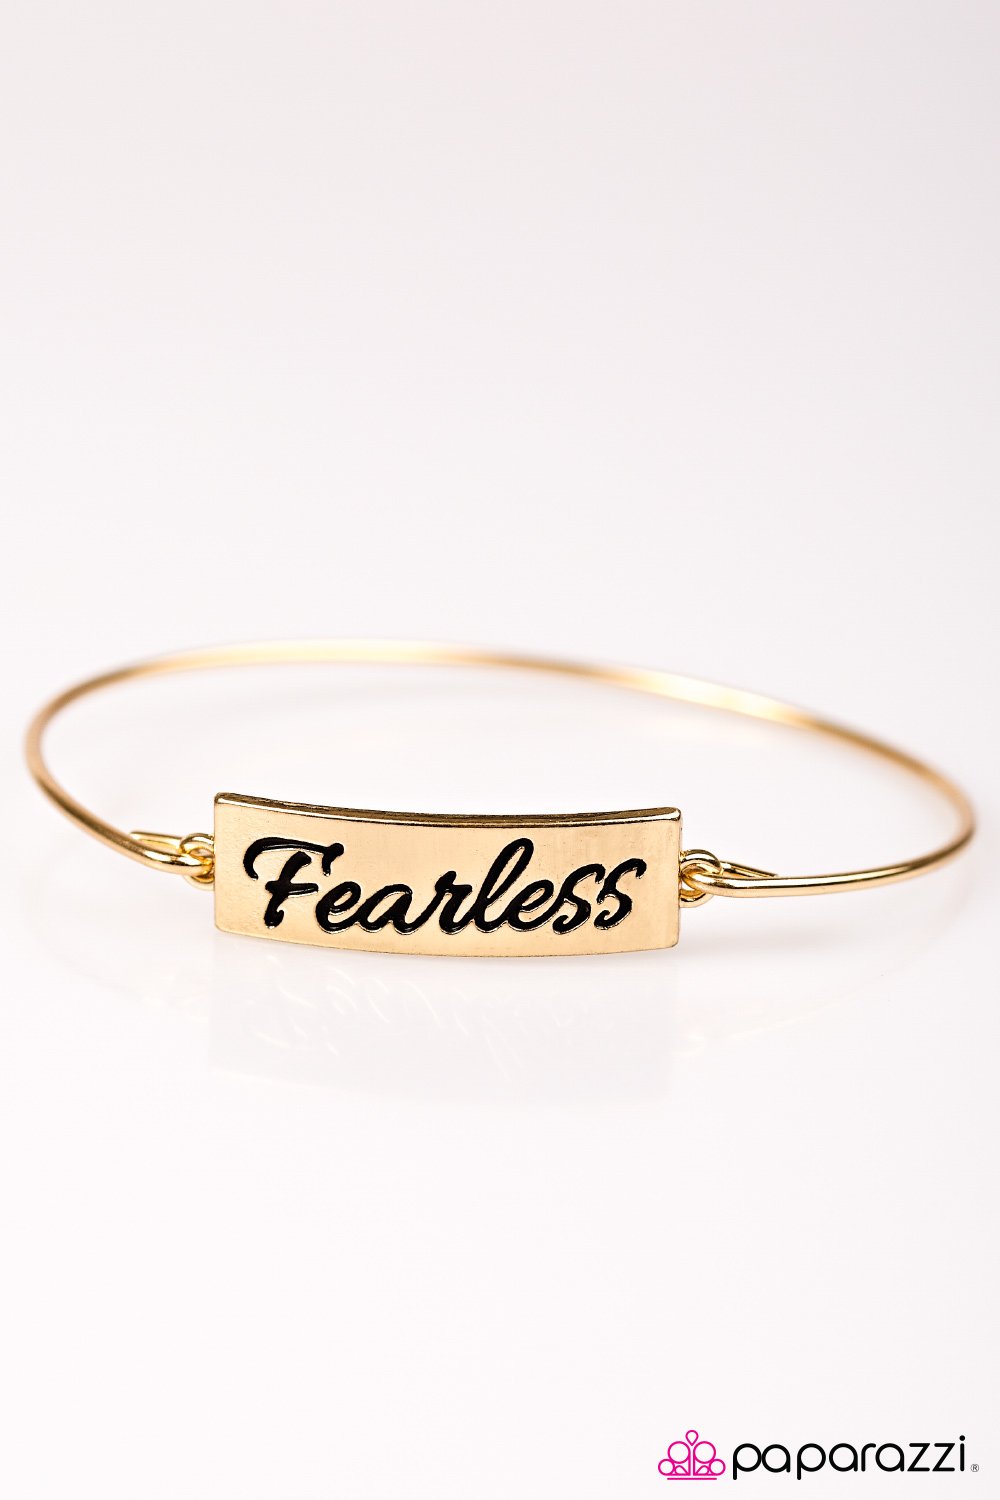 Live Fearlessly - Gold - Paparazzi Accessories - Pretty Girl Jewels